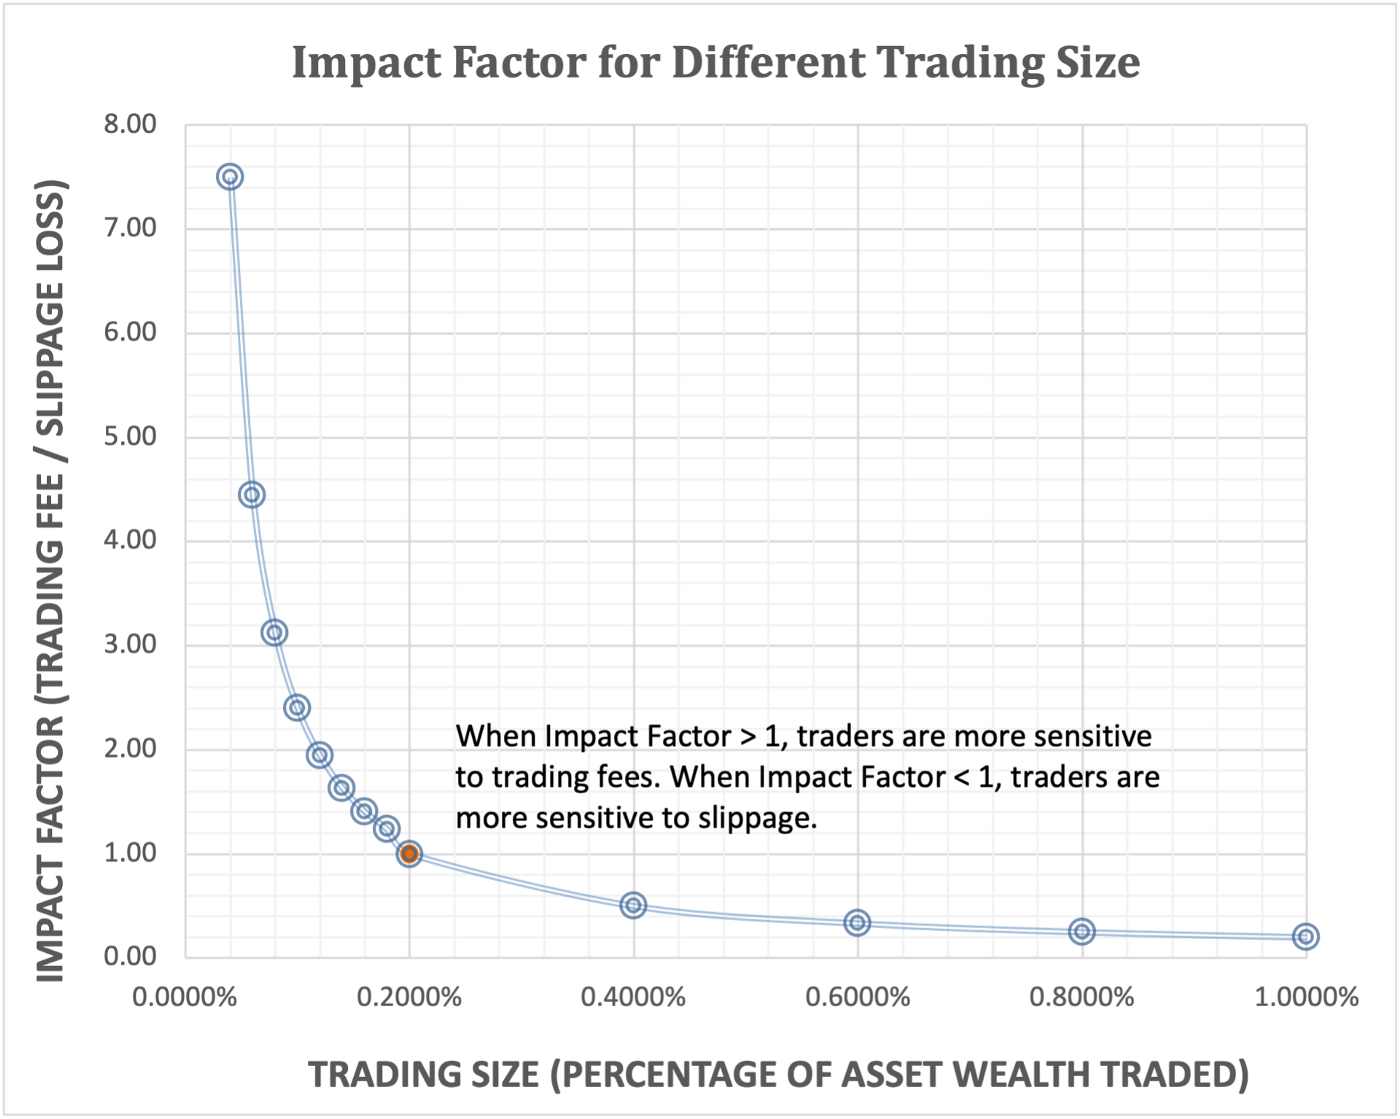 Figure 3. The Comparative Impact of Slippage and Trading Fee for Different Trading Size. Assuming: 1. we have a two-asset liquidity pool with equal wealth for both tokens (50/50); 2. the invariant formula is the classic CPMM; 3. the trading fee is 0.2% (as adopted by Clipper while Uniswap v2 is 0.3%). Impact Factor = Trading Fee / Slippage Loss. When Impact Factor > 1, traders are more sensitive to trading fees; and vice versa. The trading size is measured by the percentage of asset wealth being traded. From the plot, we can tell that if you are a trader trading less than 0.2% of the asset wealth, you probably want to care more about the trading fee than the slippage.